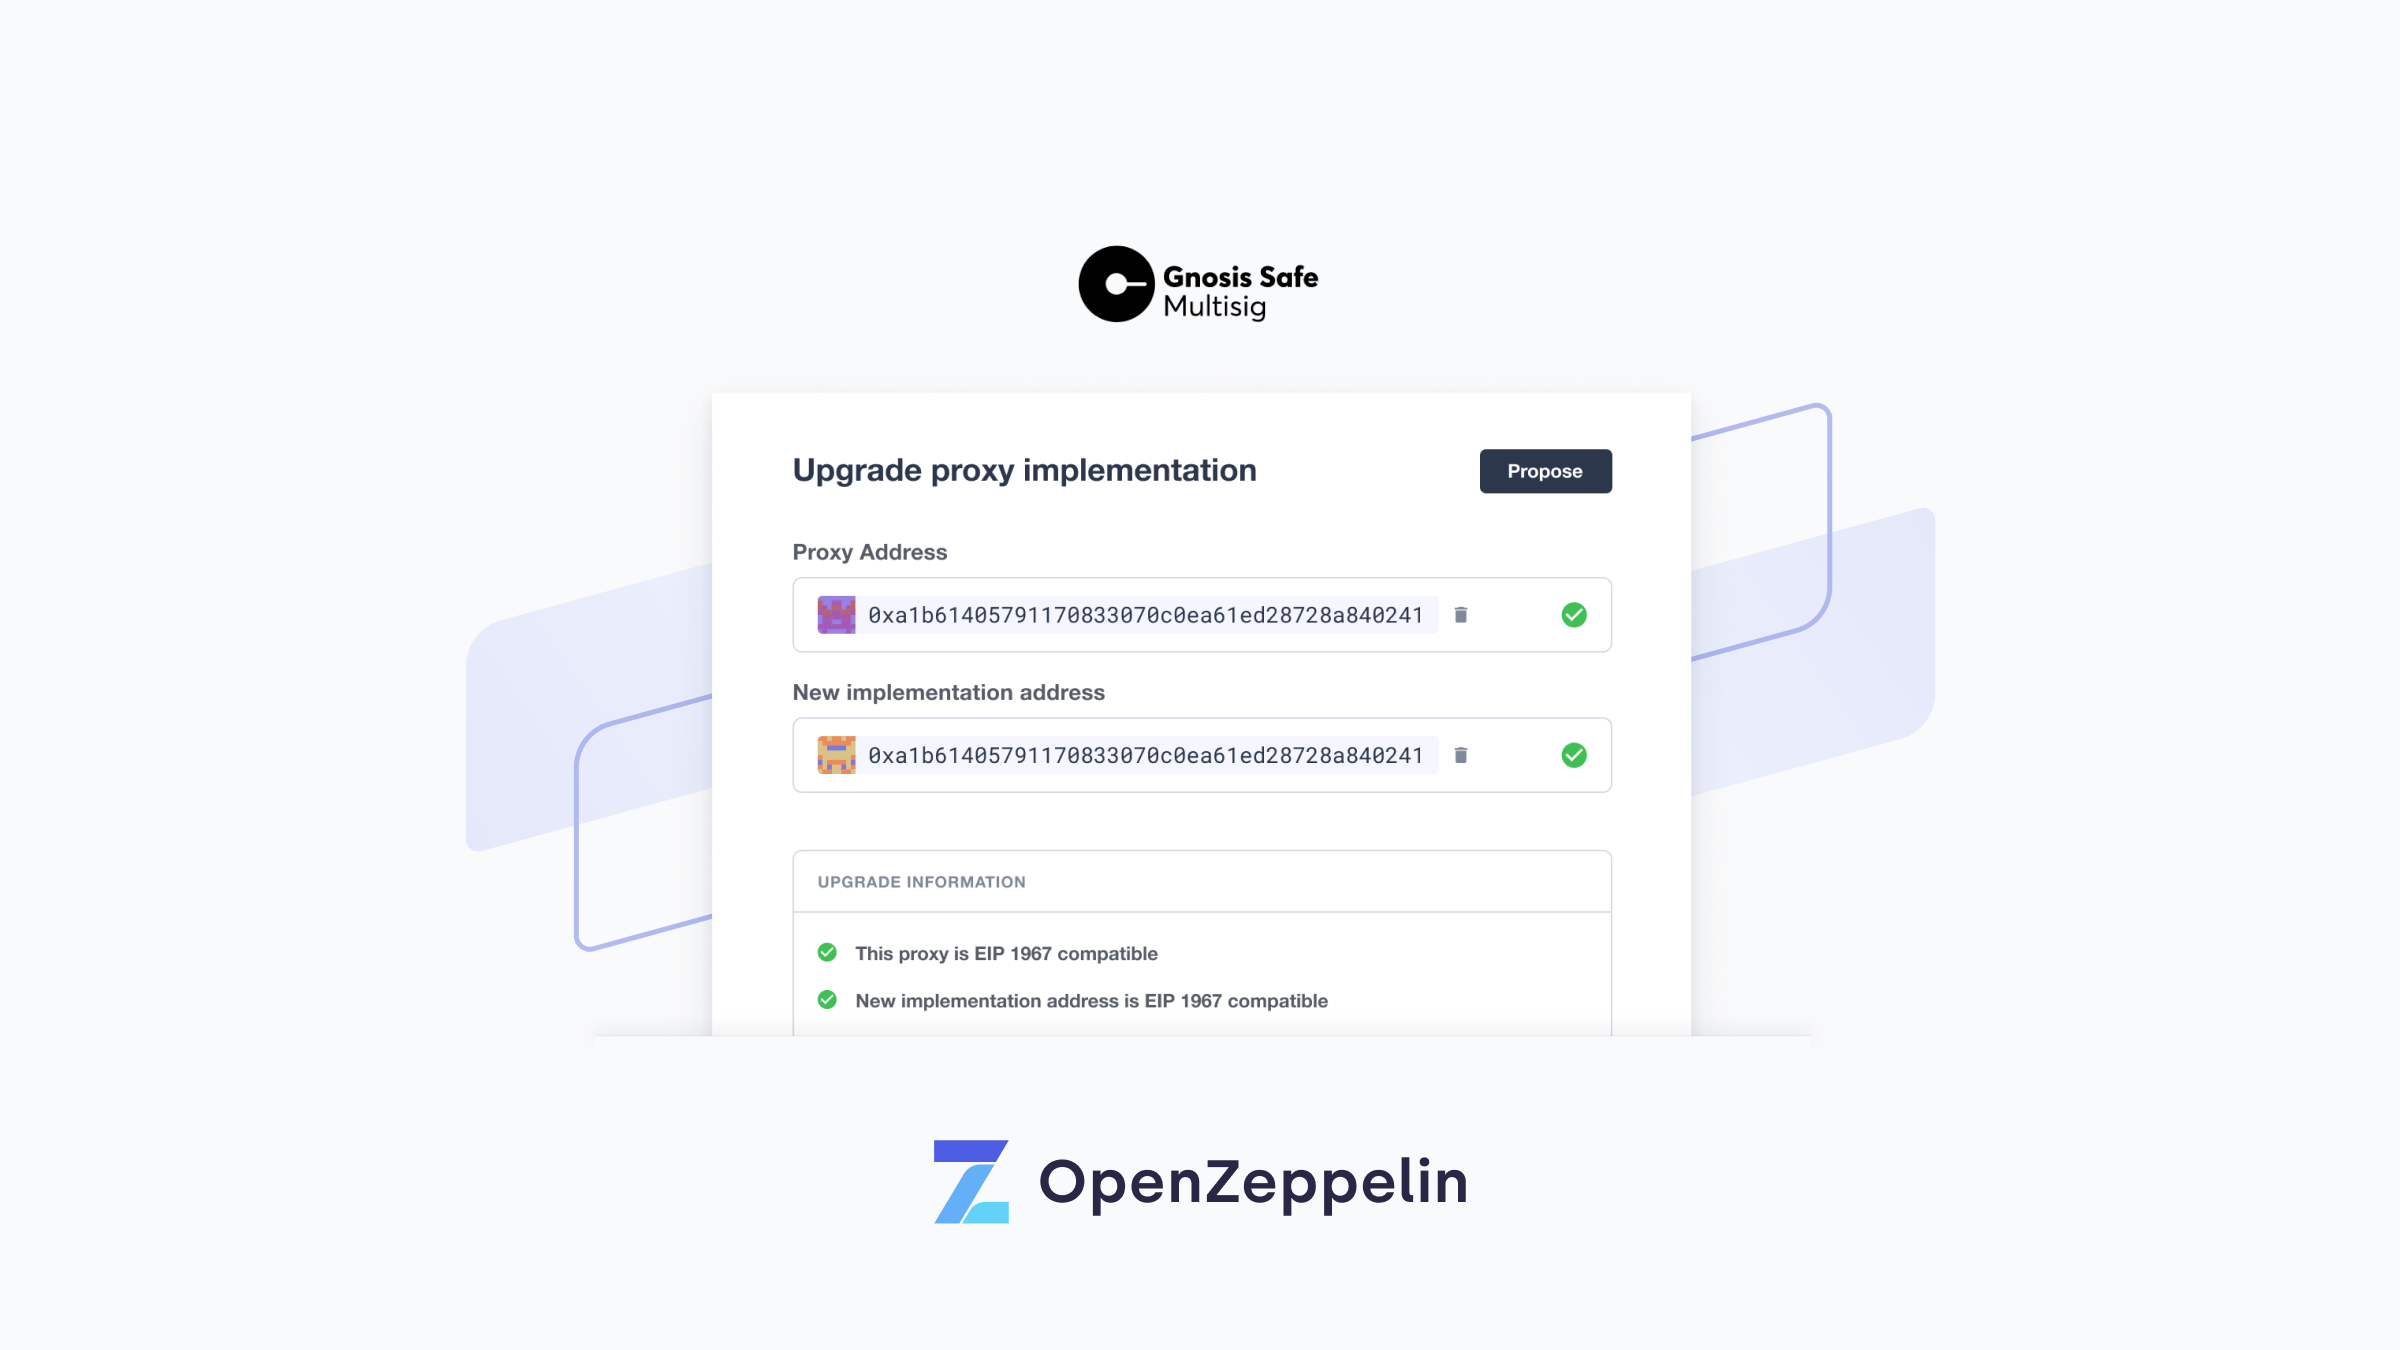 OpenZeppelin Upgrades App for Gnosis Safe Featured Image